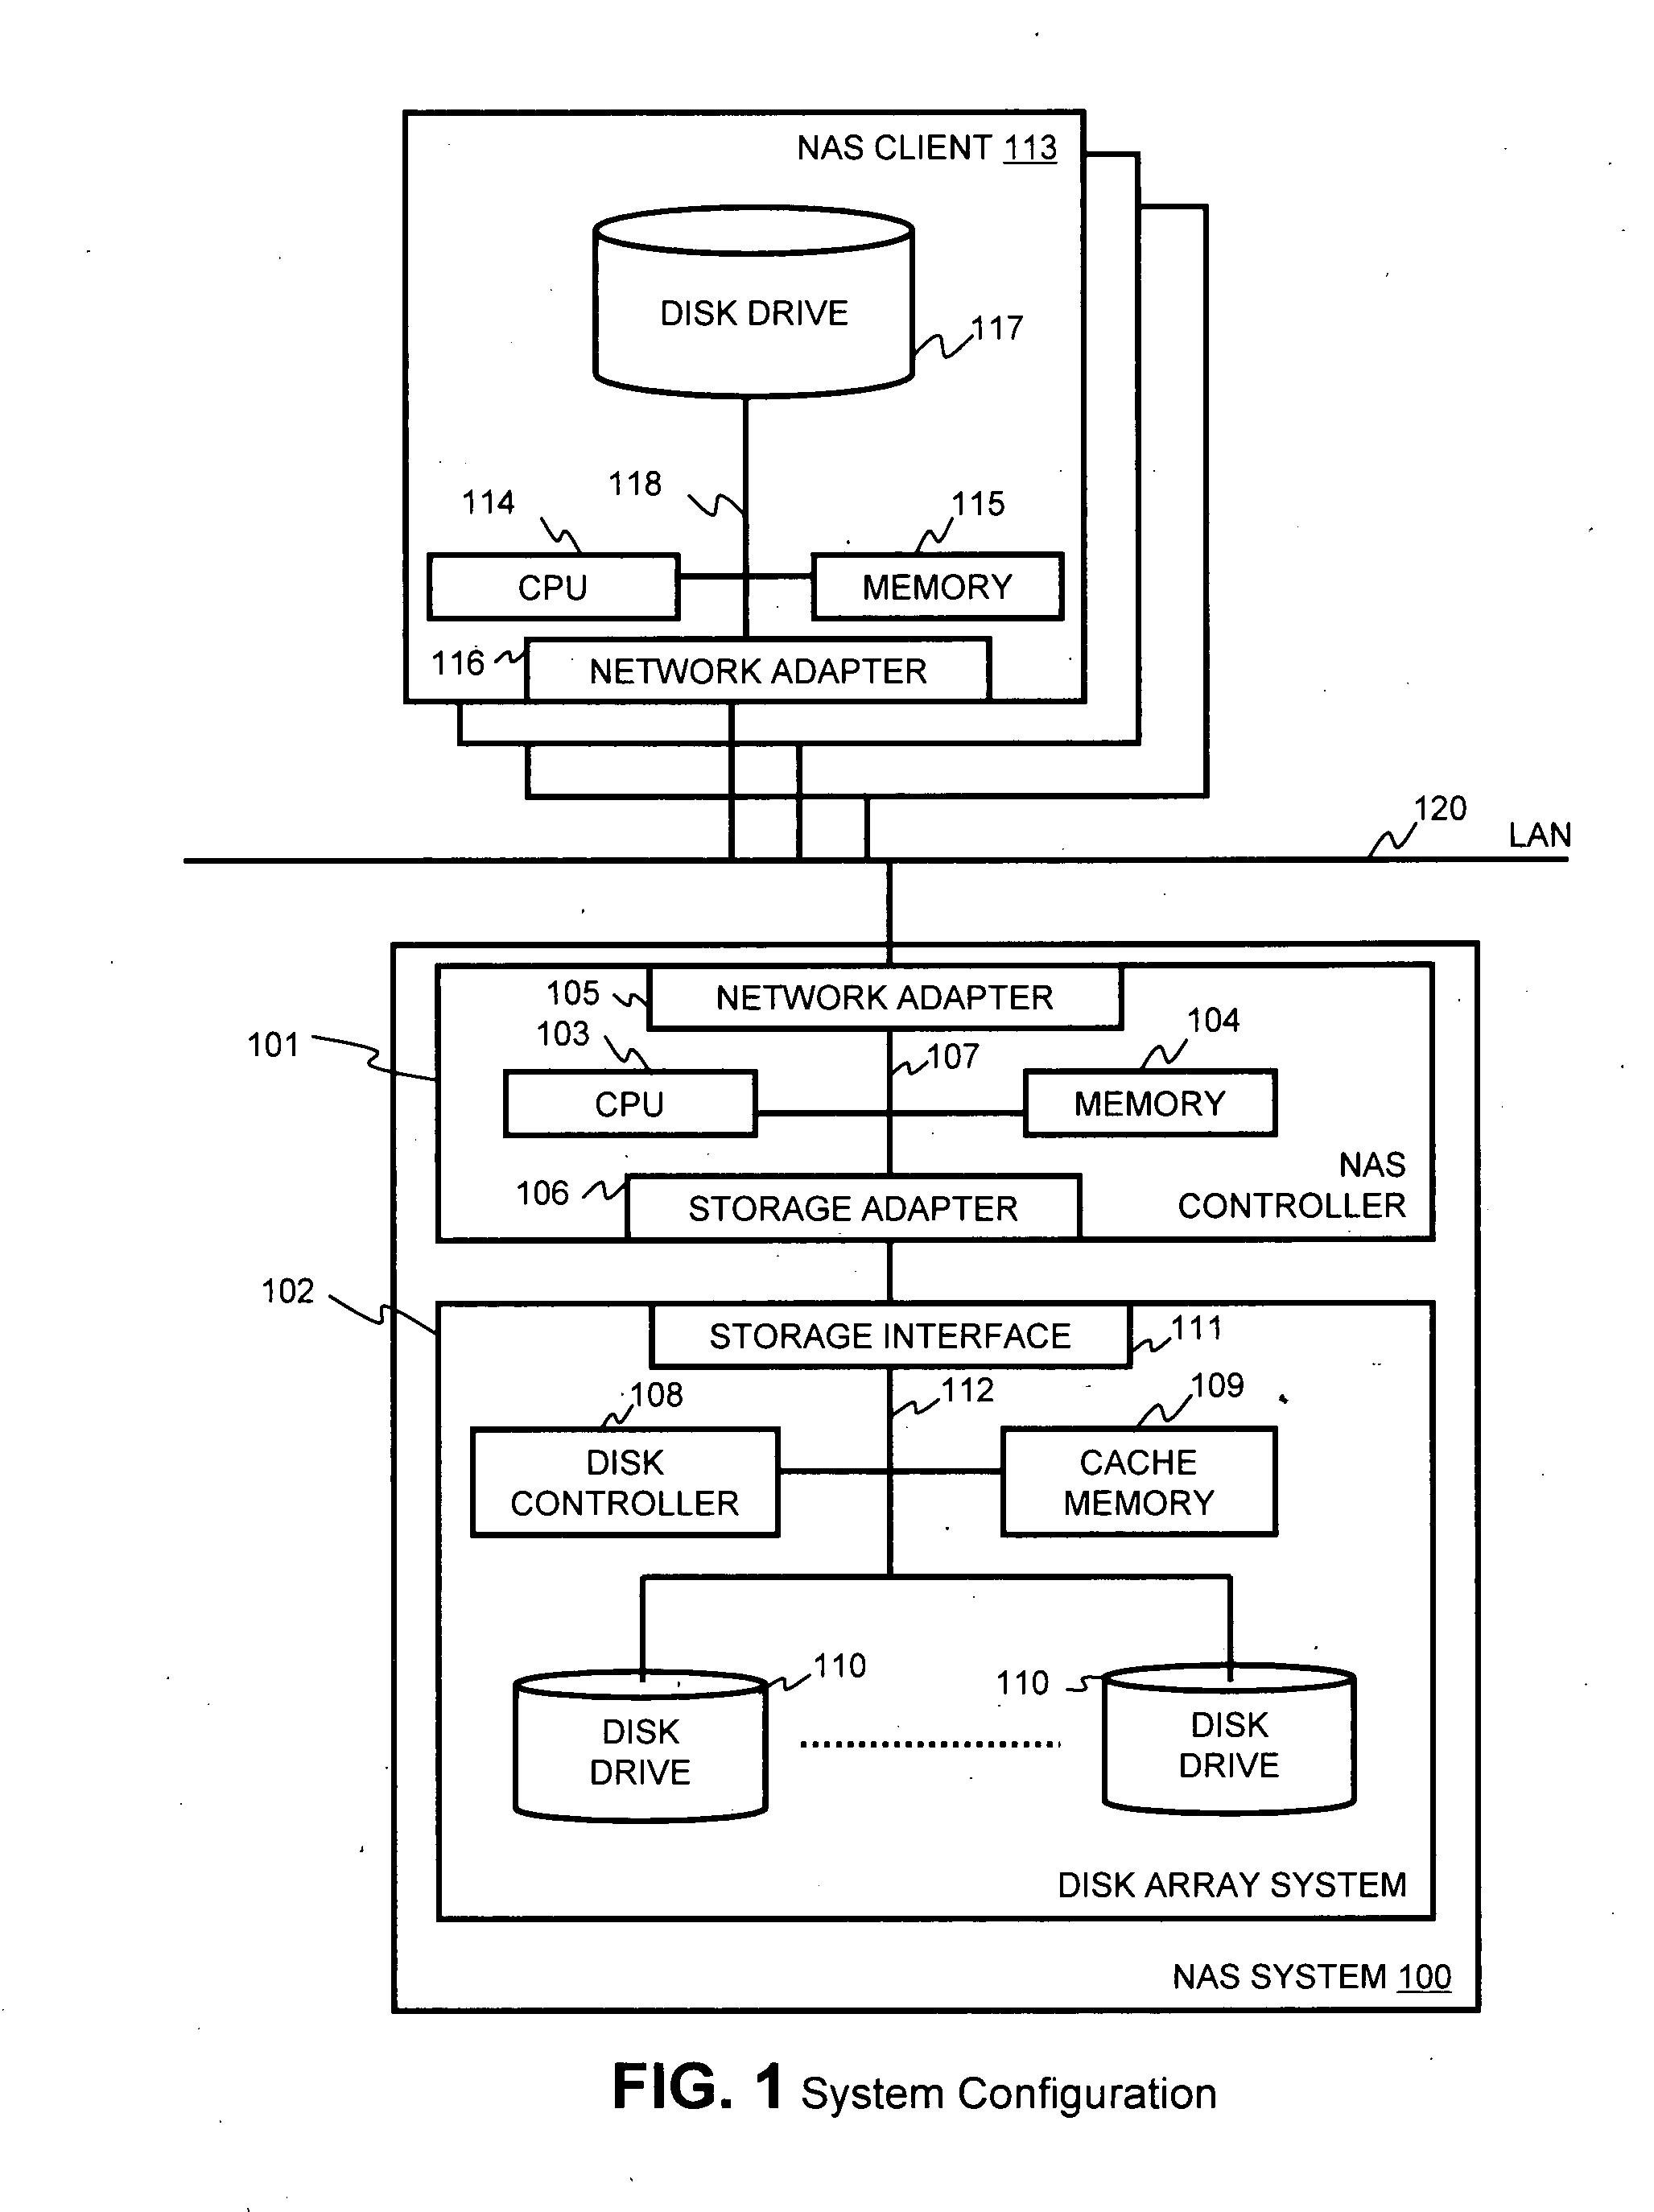 Method and apparatus for enabling a NAS system to utilize thin provisioning